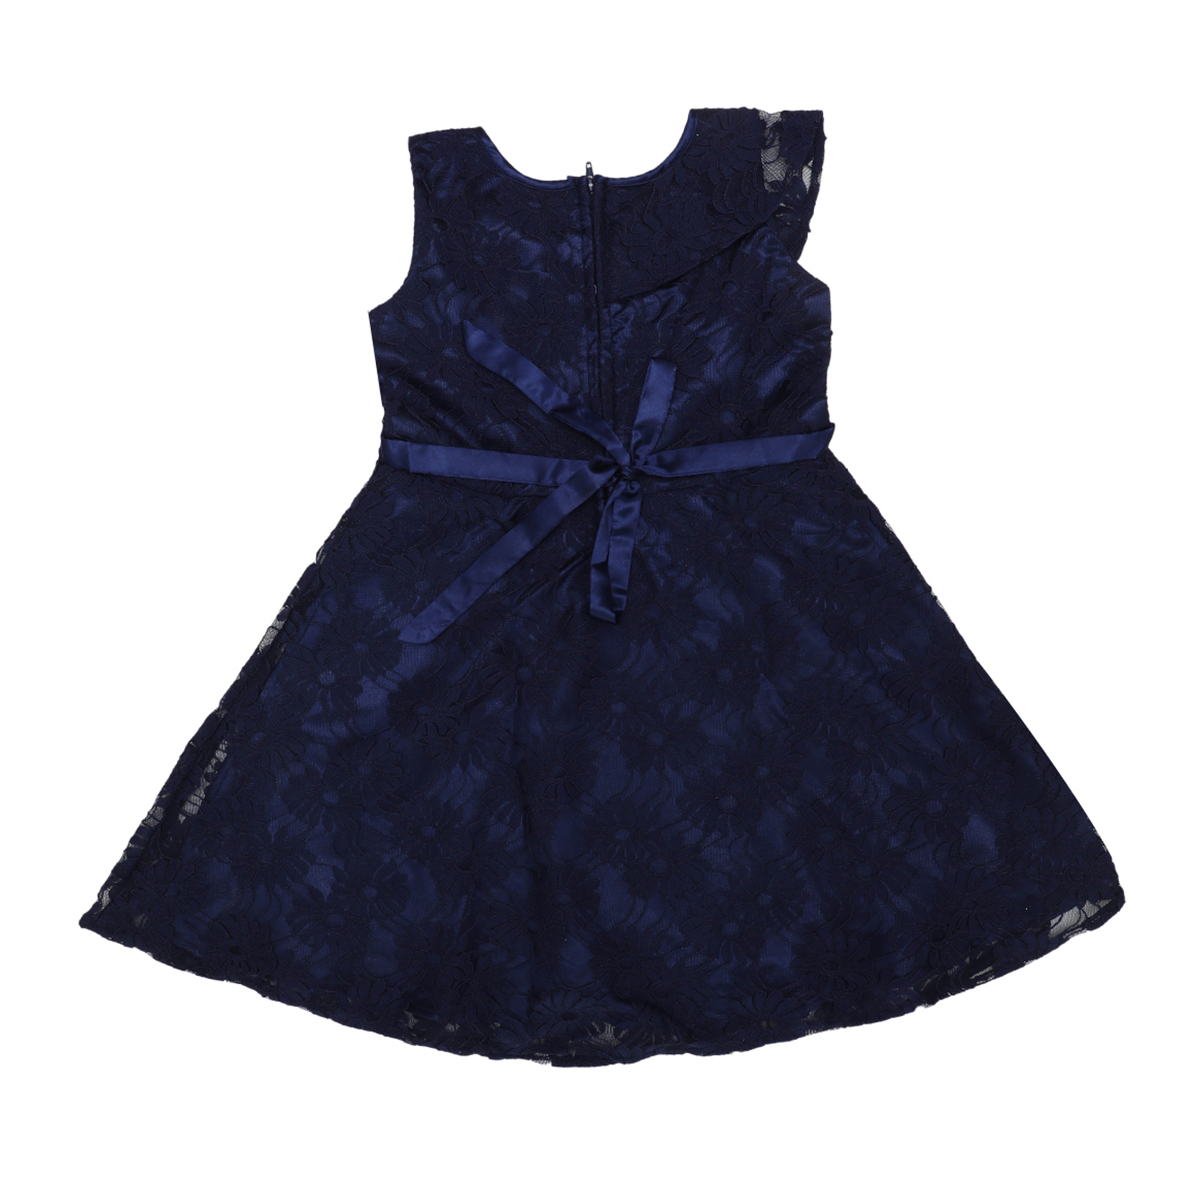 Doodle Girls Midi/Knee Length A-Line Party Dress- Navy- 12Y